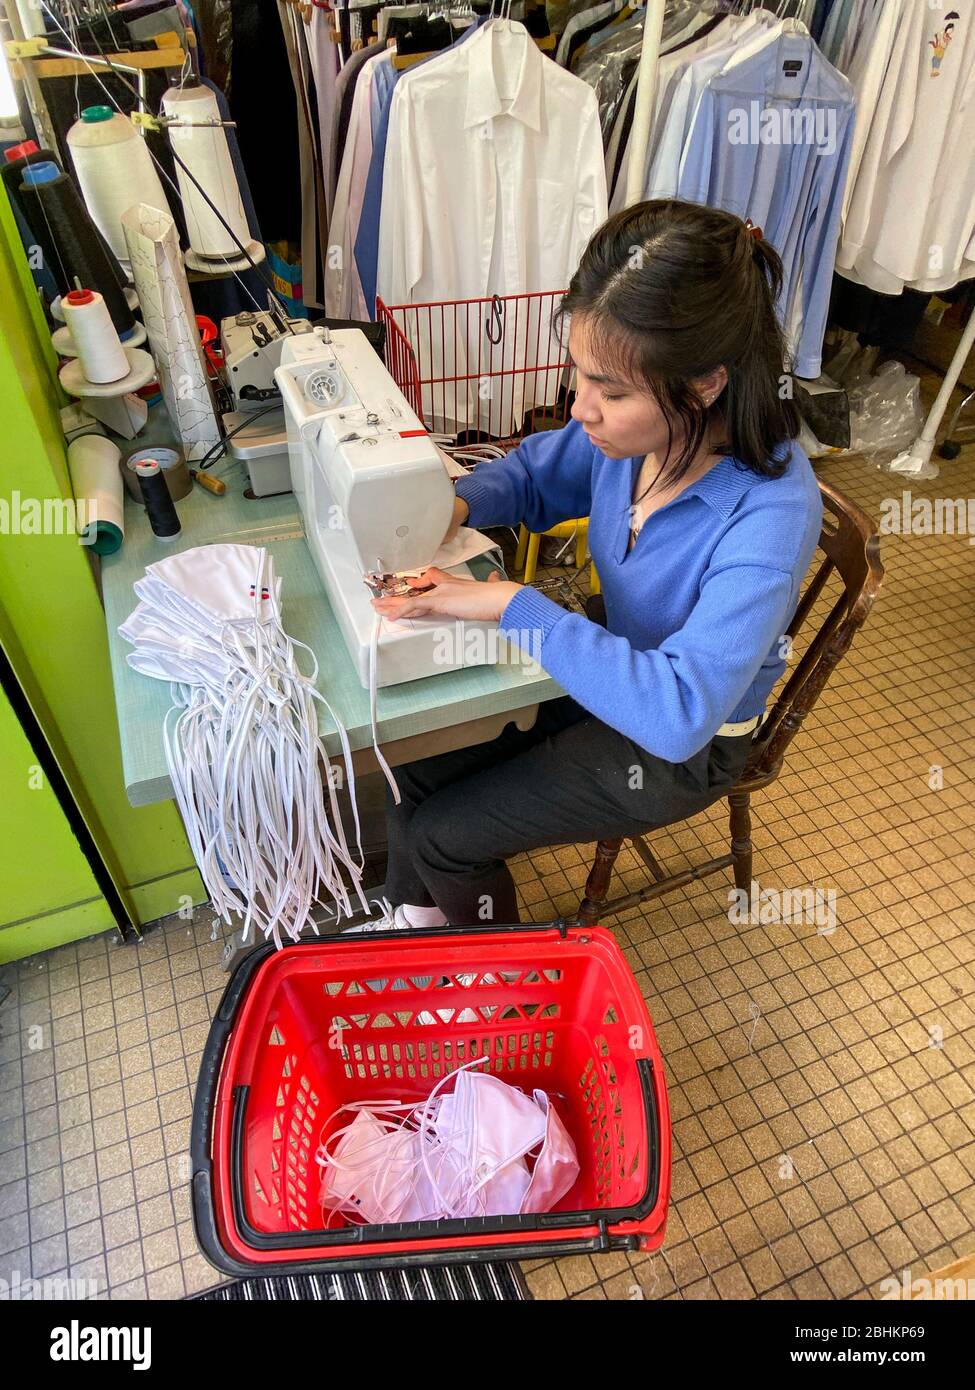 A VIETNAMESE FAMILY IS MAKING FACIAL MASKS DURING THE PARISIEN LOCKDOWN IN HIS CLOSED DRY-CLEANER Stock Photo